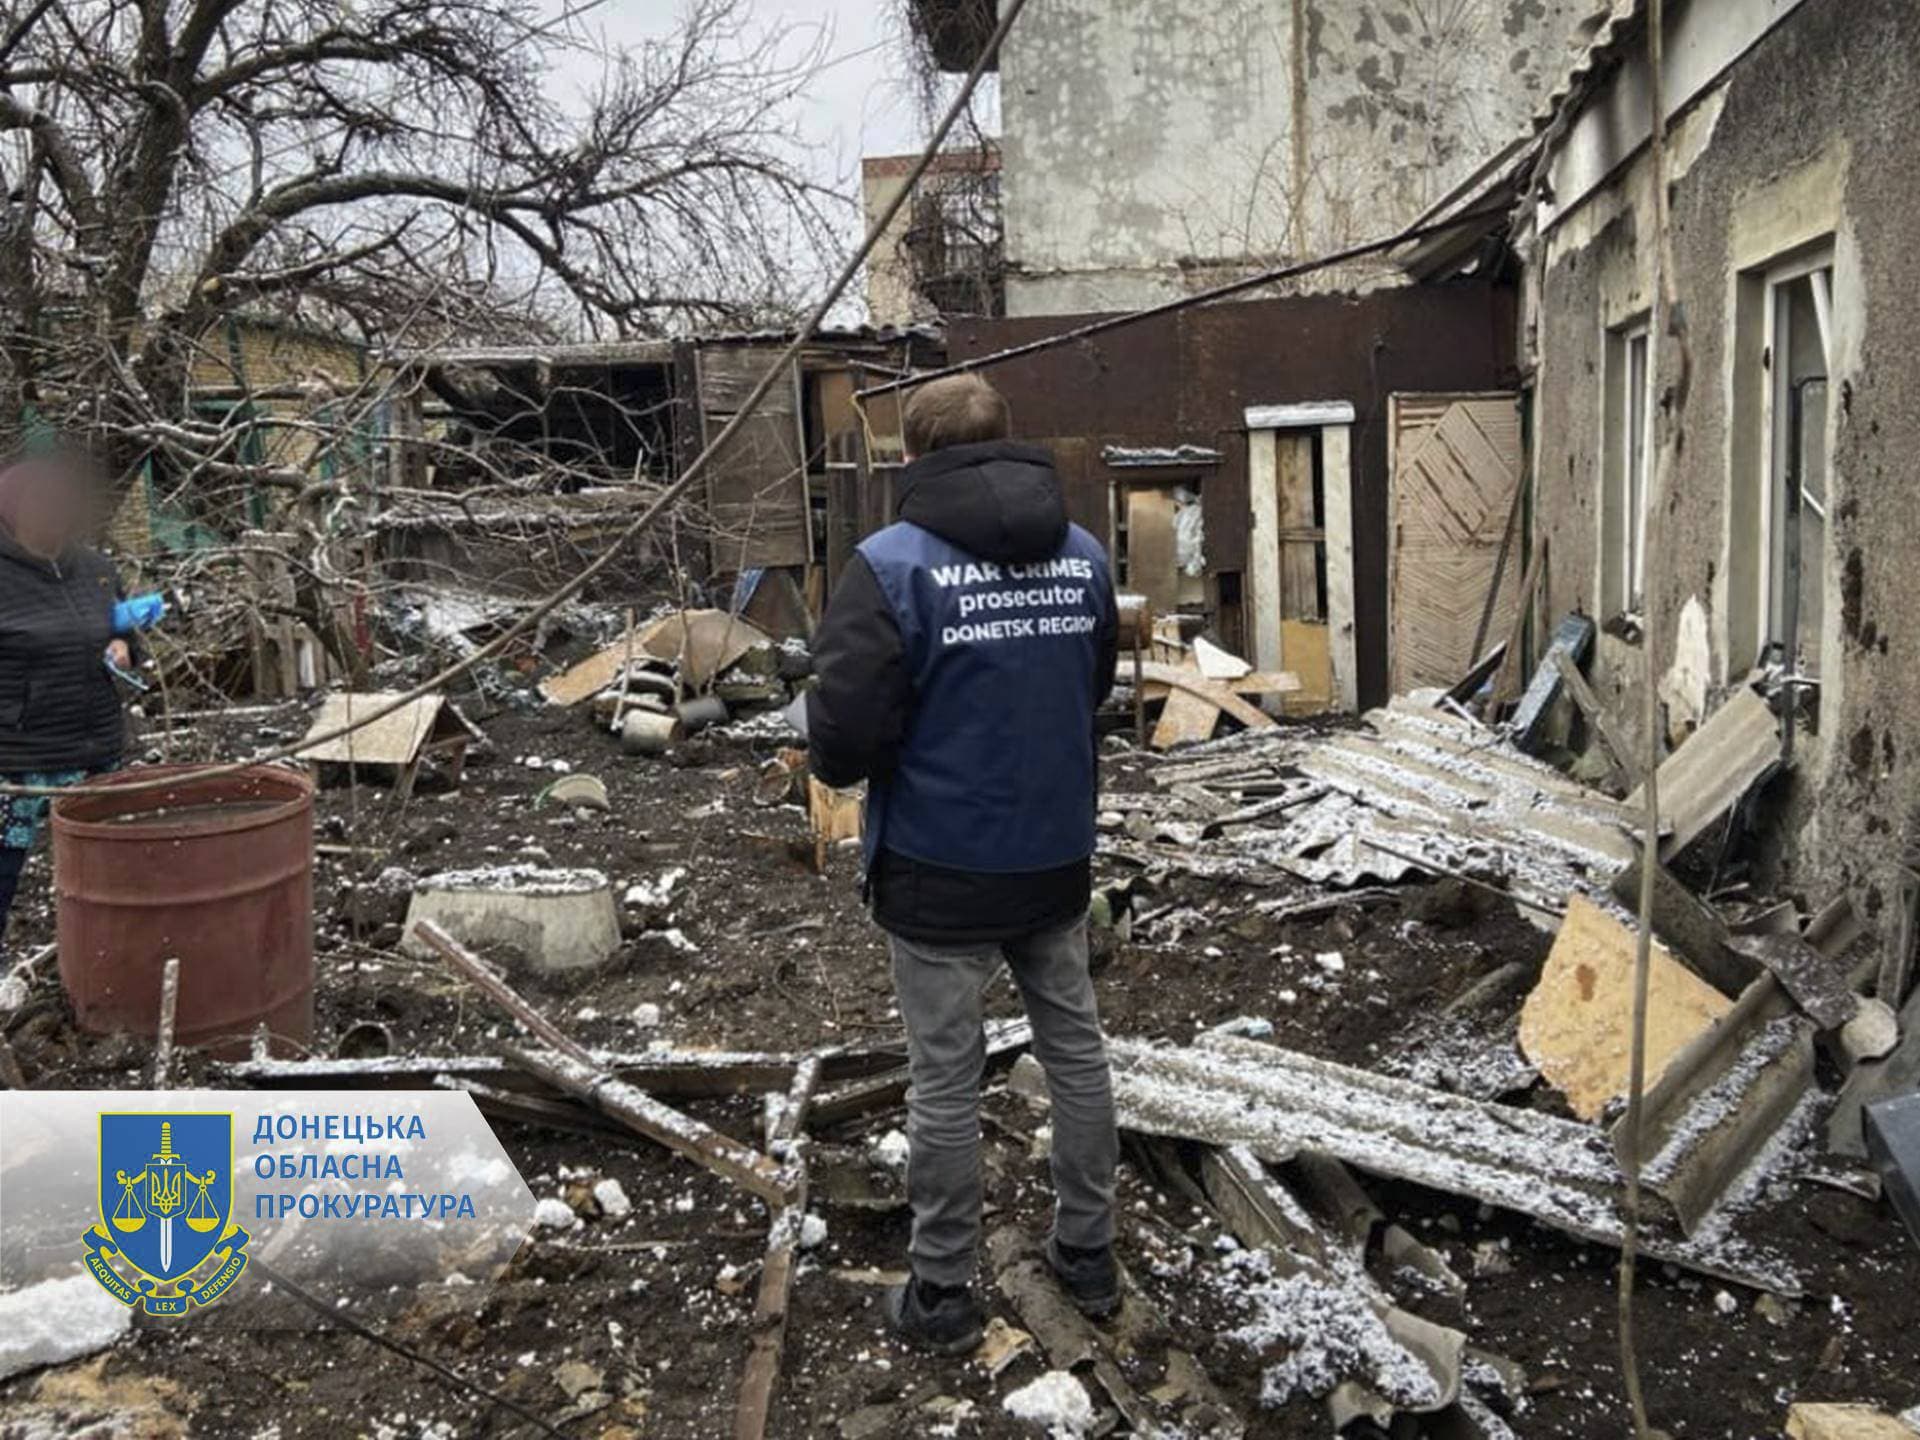 A war crime prosecutor inspects the scene after shelling in Pokrovsk